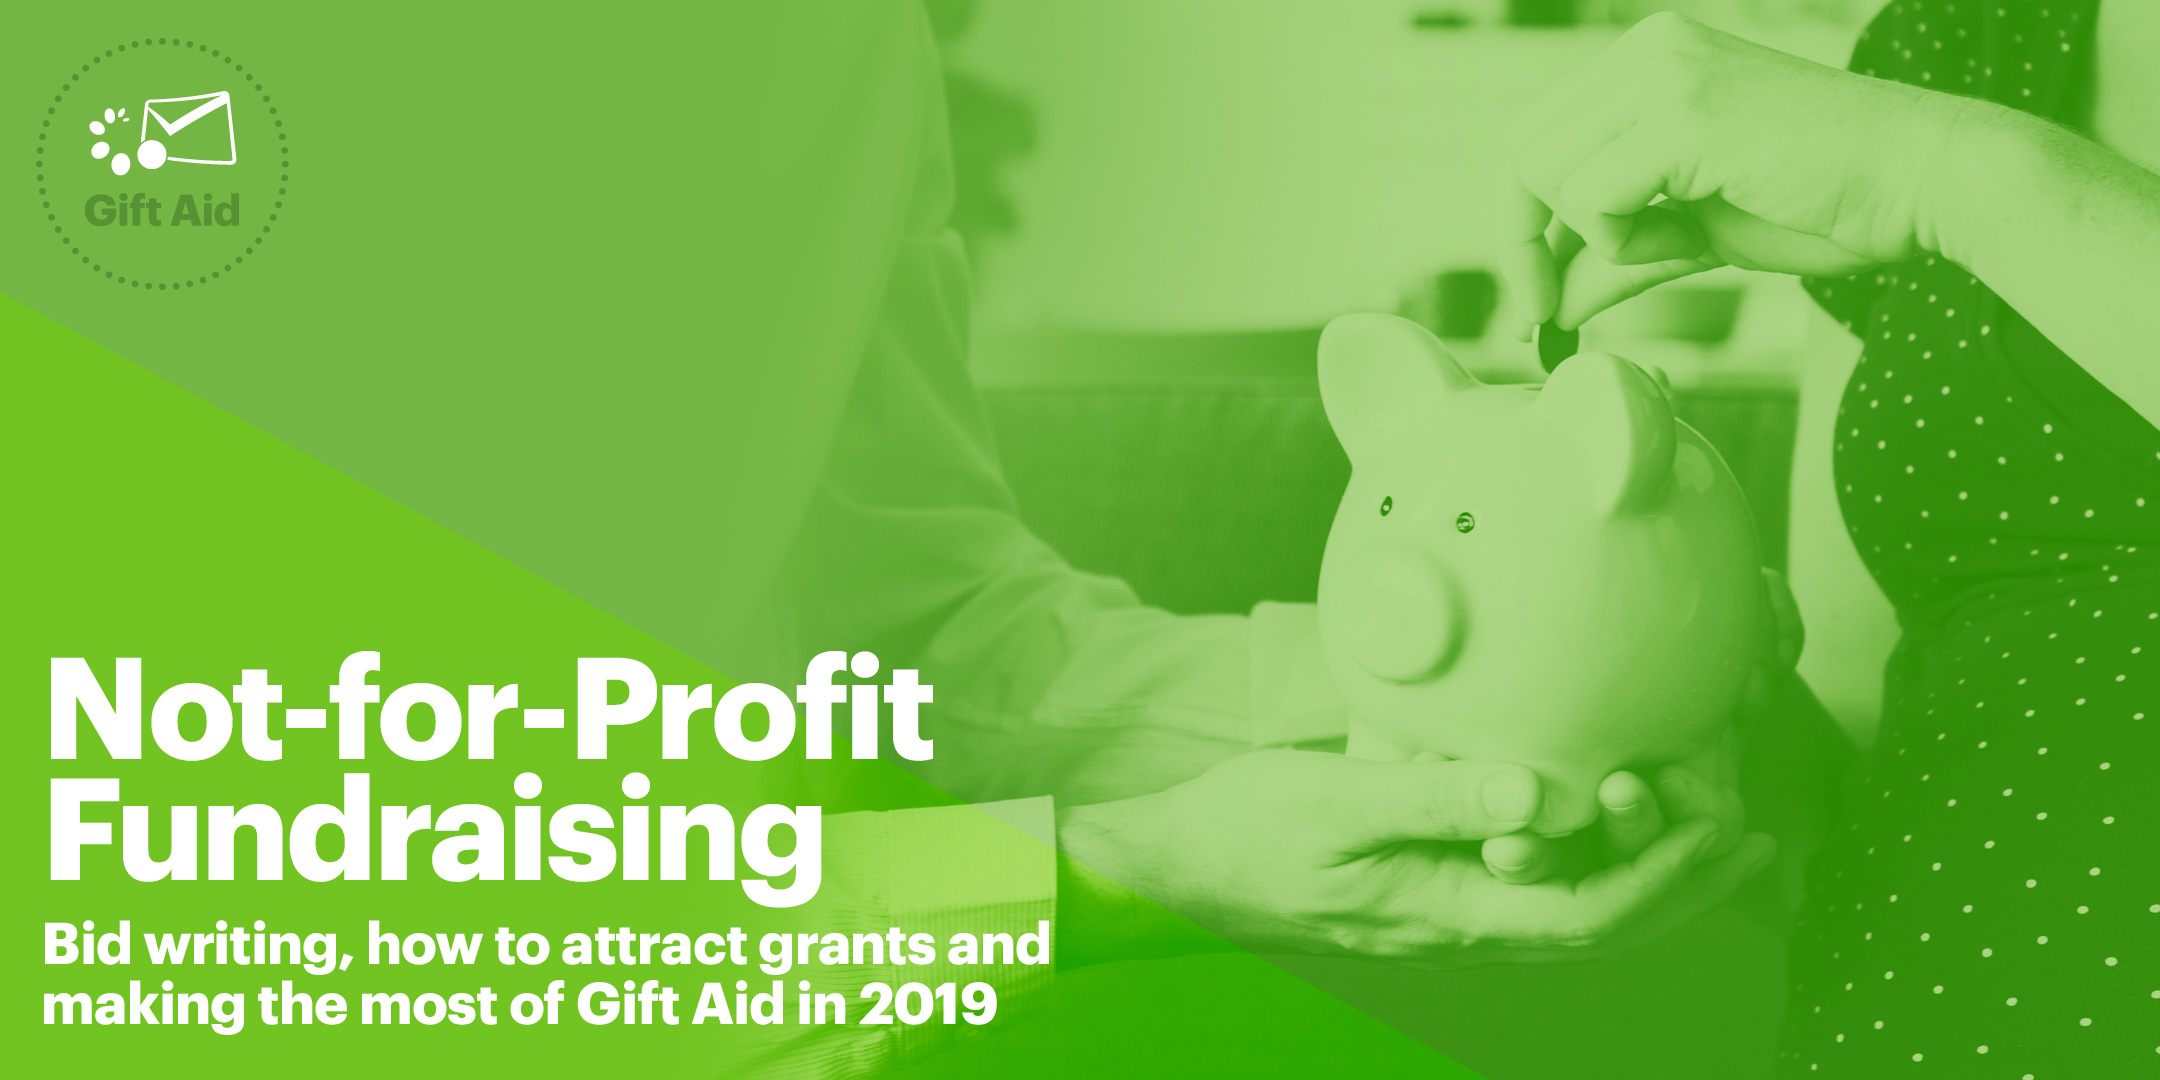 Not-for-Profit Fundraising: Bid writing, how to attract grants and making the most of Gift Aid in 2019. Kensington, London. 11am to 4pm, Saturday 3rd August 2019.